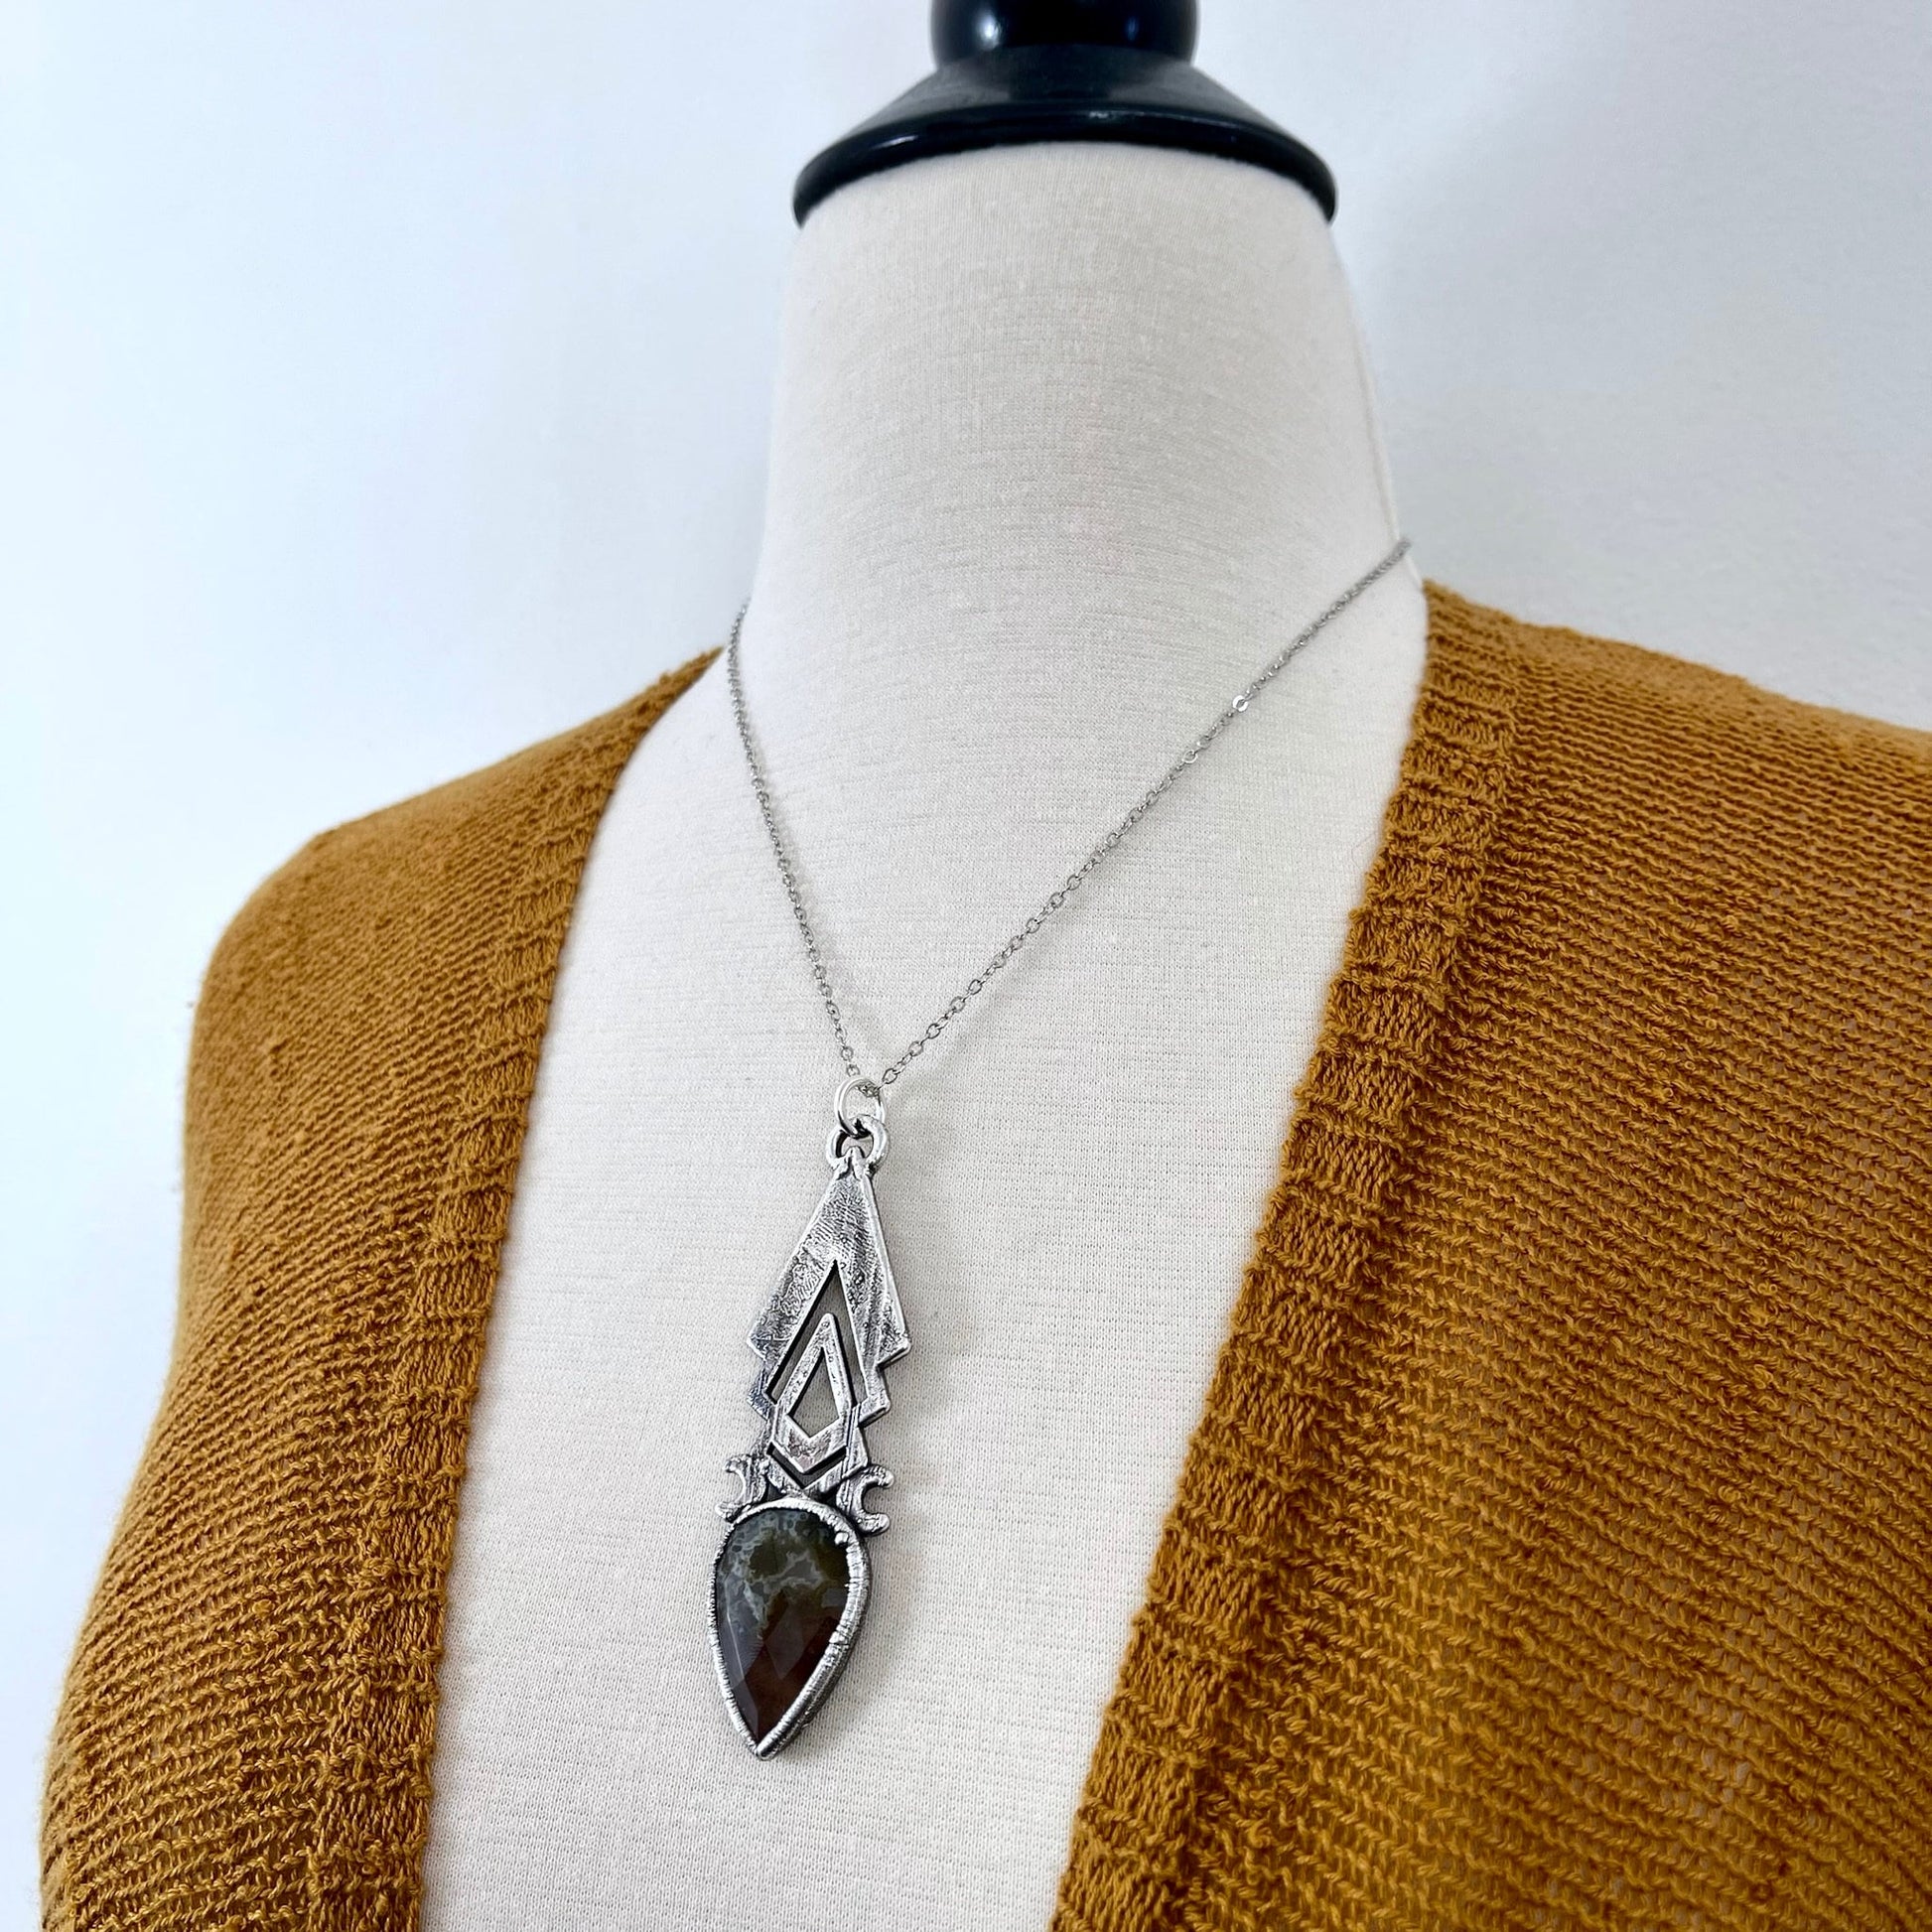 Big Crystal Necklace, Big Stone Necklace, Bohemian Jewelry, Crystal Necklaces, Etsy ID: 1410677338, Foxlark Alchemy, FOXLARK- NECKLACES, Jewelry, Large Crystal, Large Raw Crystal, layering necklace, Necklaces, Raw crystal jewelry, raw crystal necklace, Ra